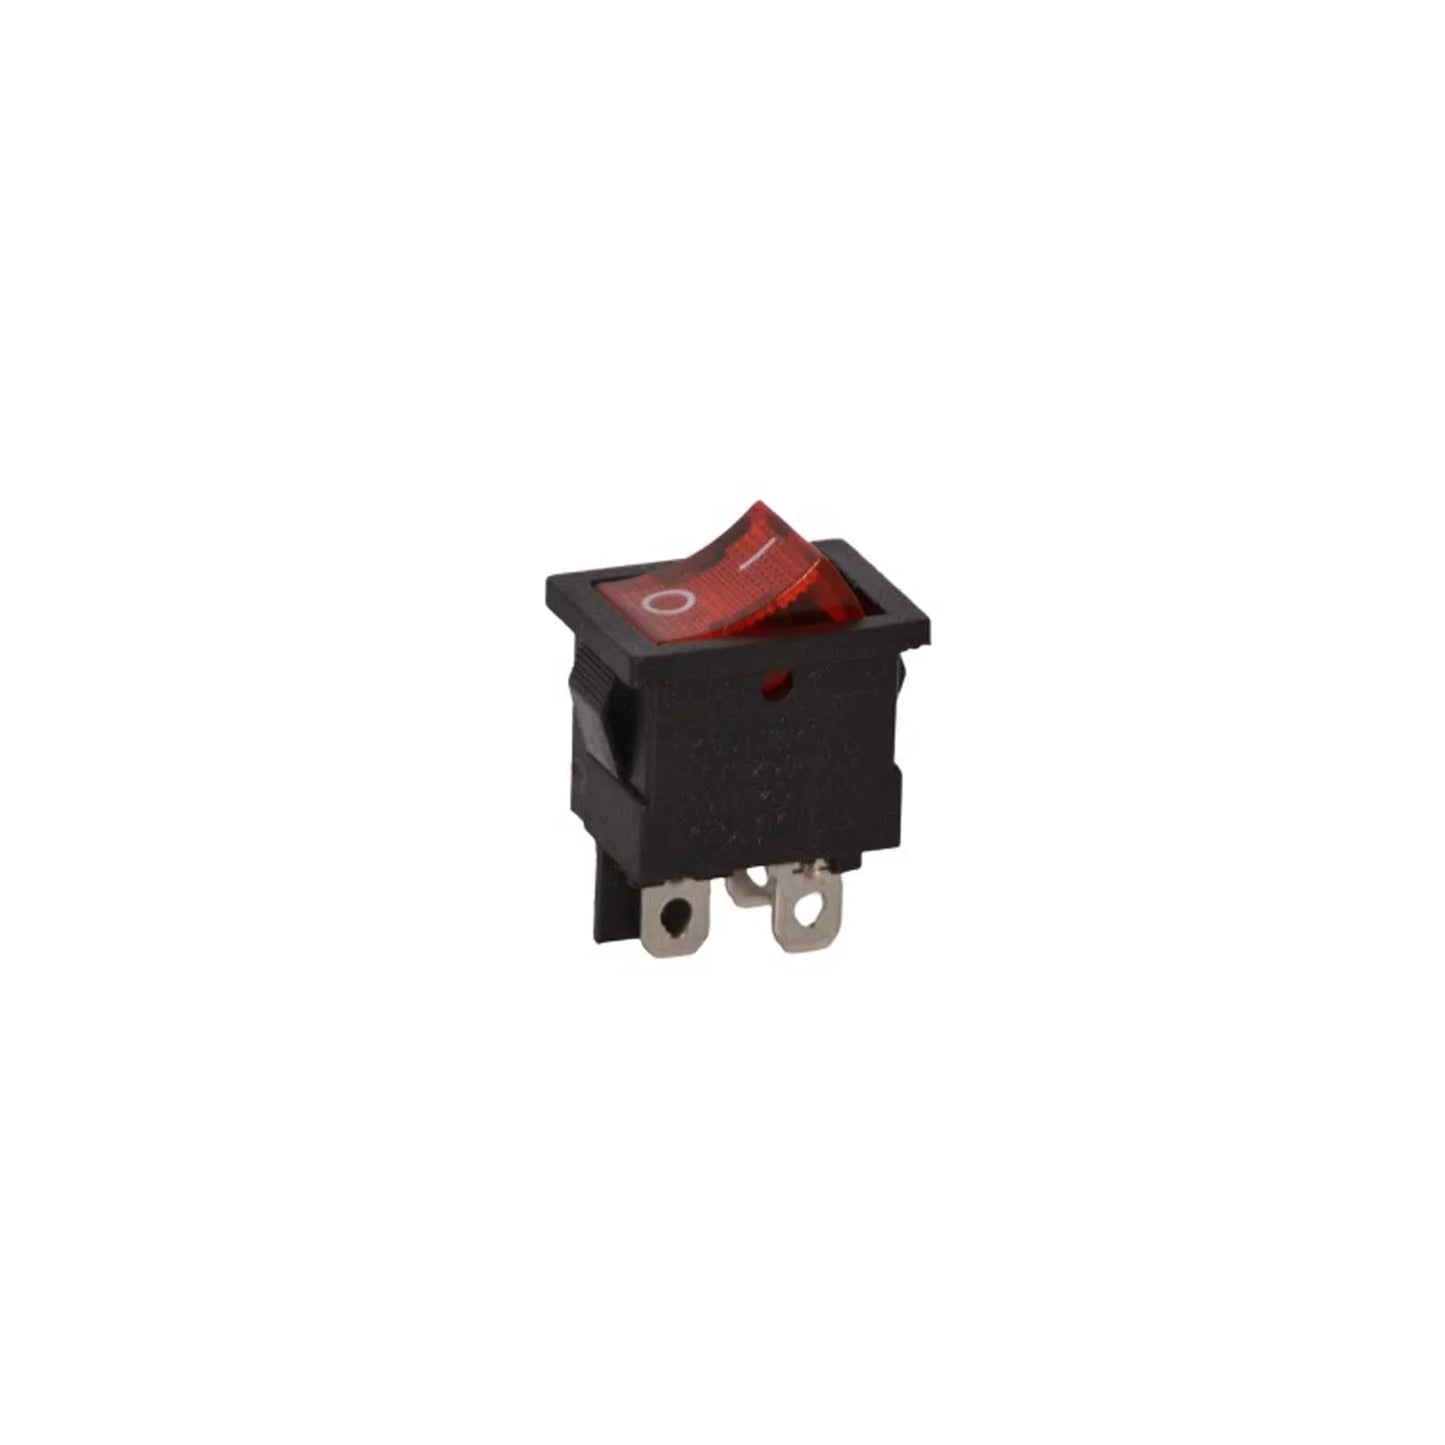 6A 250V Mini DPST Rocker Switch with Indicator